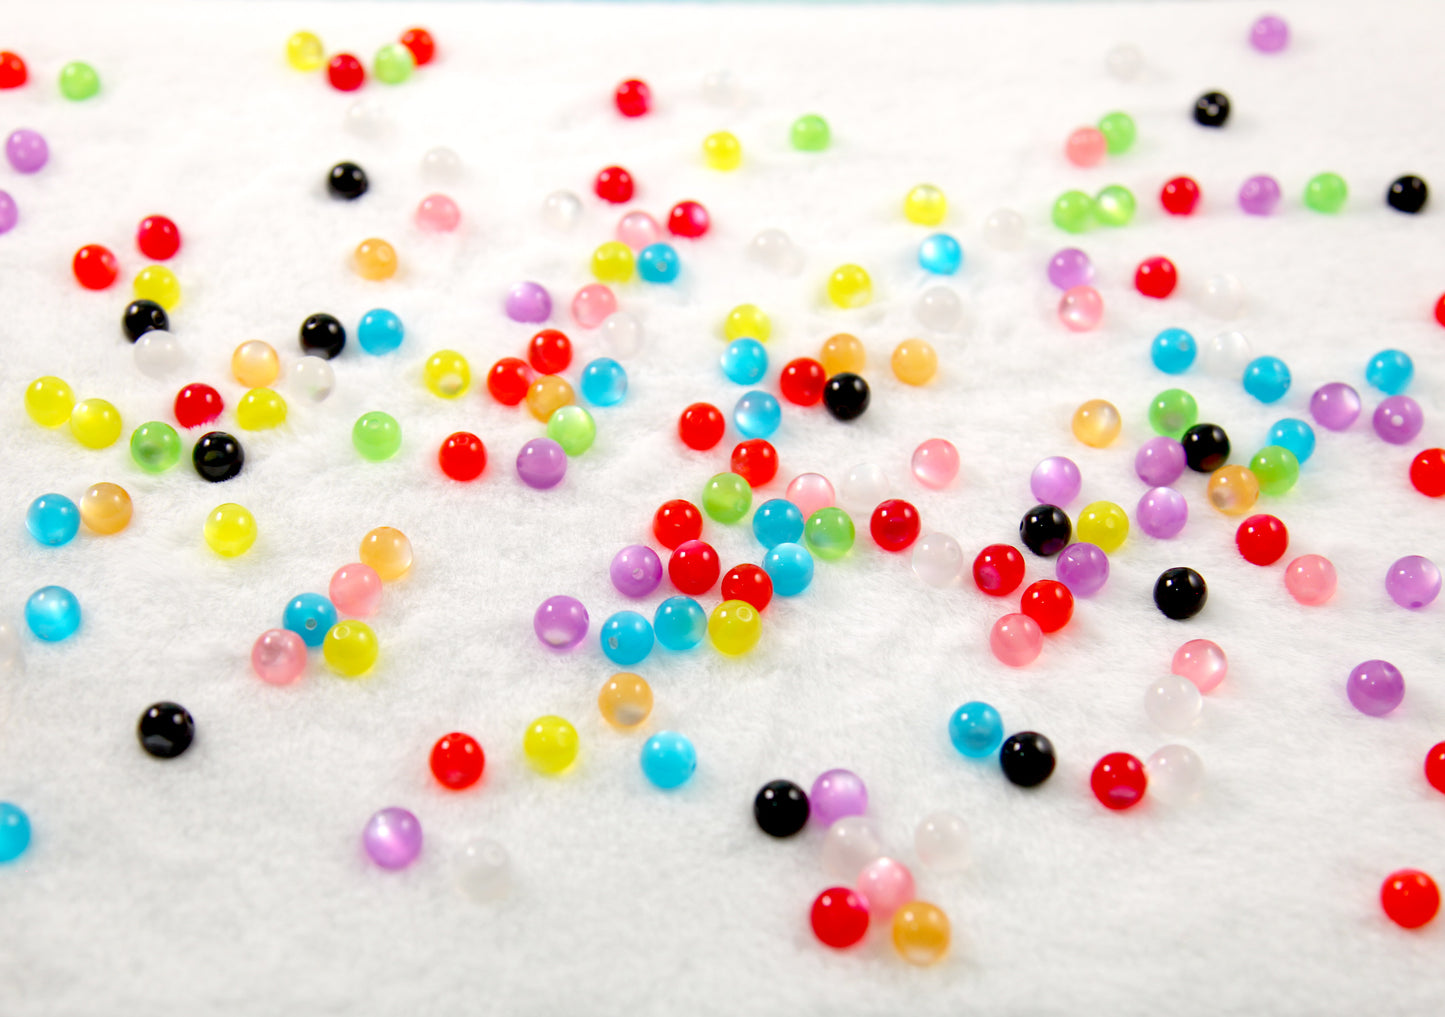 Cats Eye Beads - 10mm Colorful Moonglow Pearly Acrylic or Resin Beads - 100 pc set